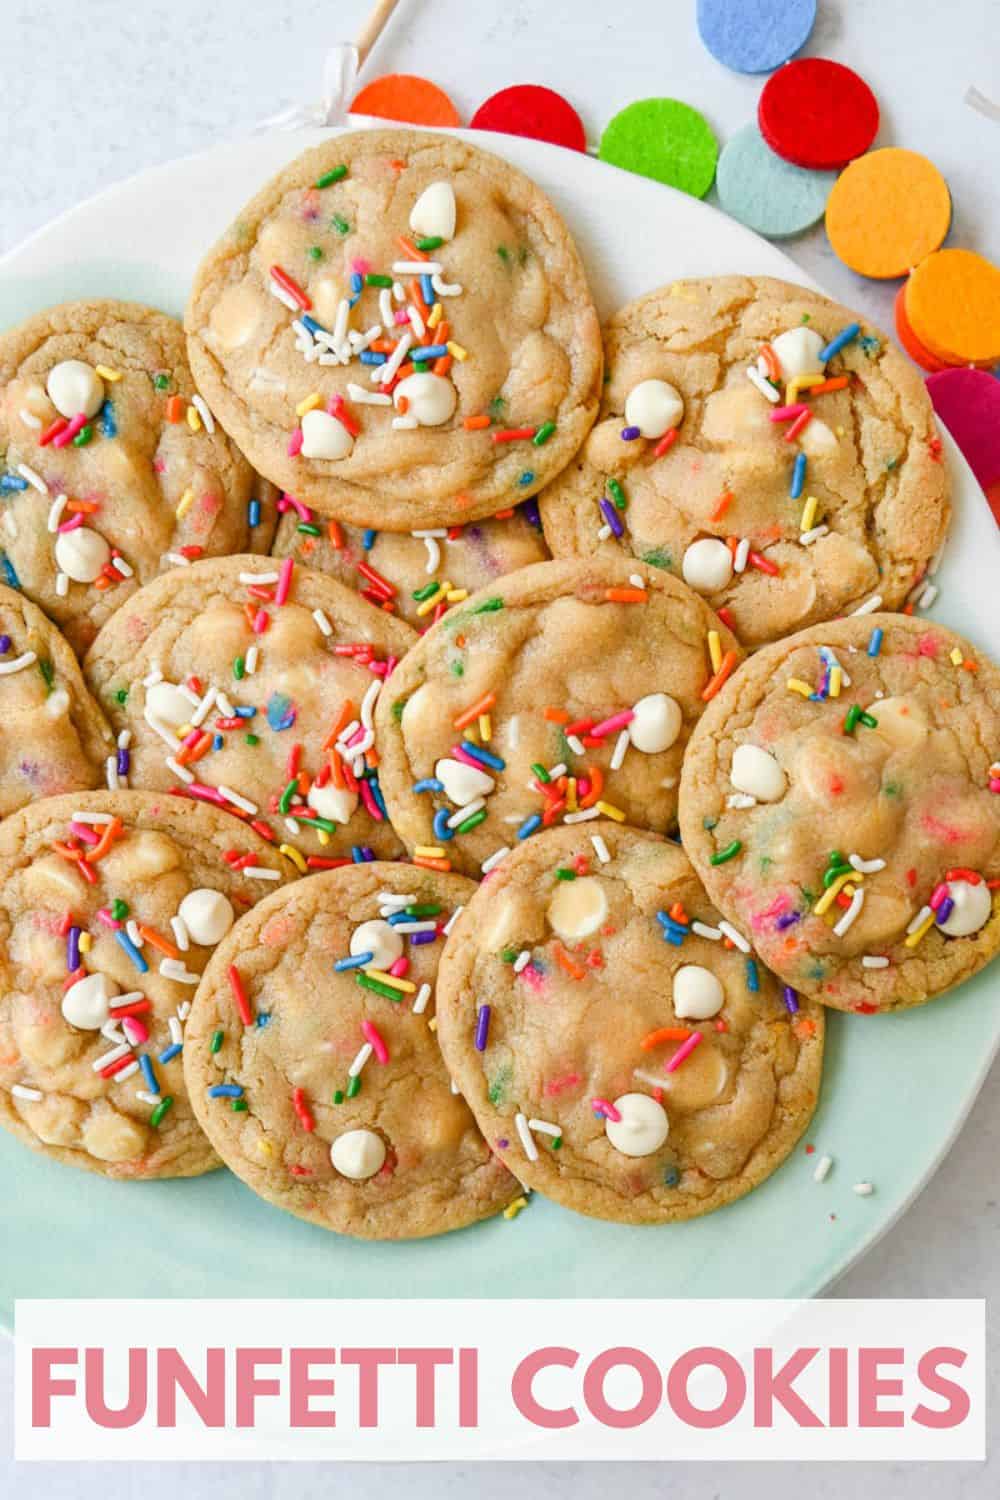 Soft, chewy sugar cookies filled with sprinkles and white chocolate. This festive funfetti cookie recipe has the perfect chewy center with buttery crisp edges filled with rainbow sprinkles.